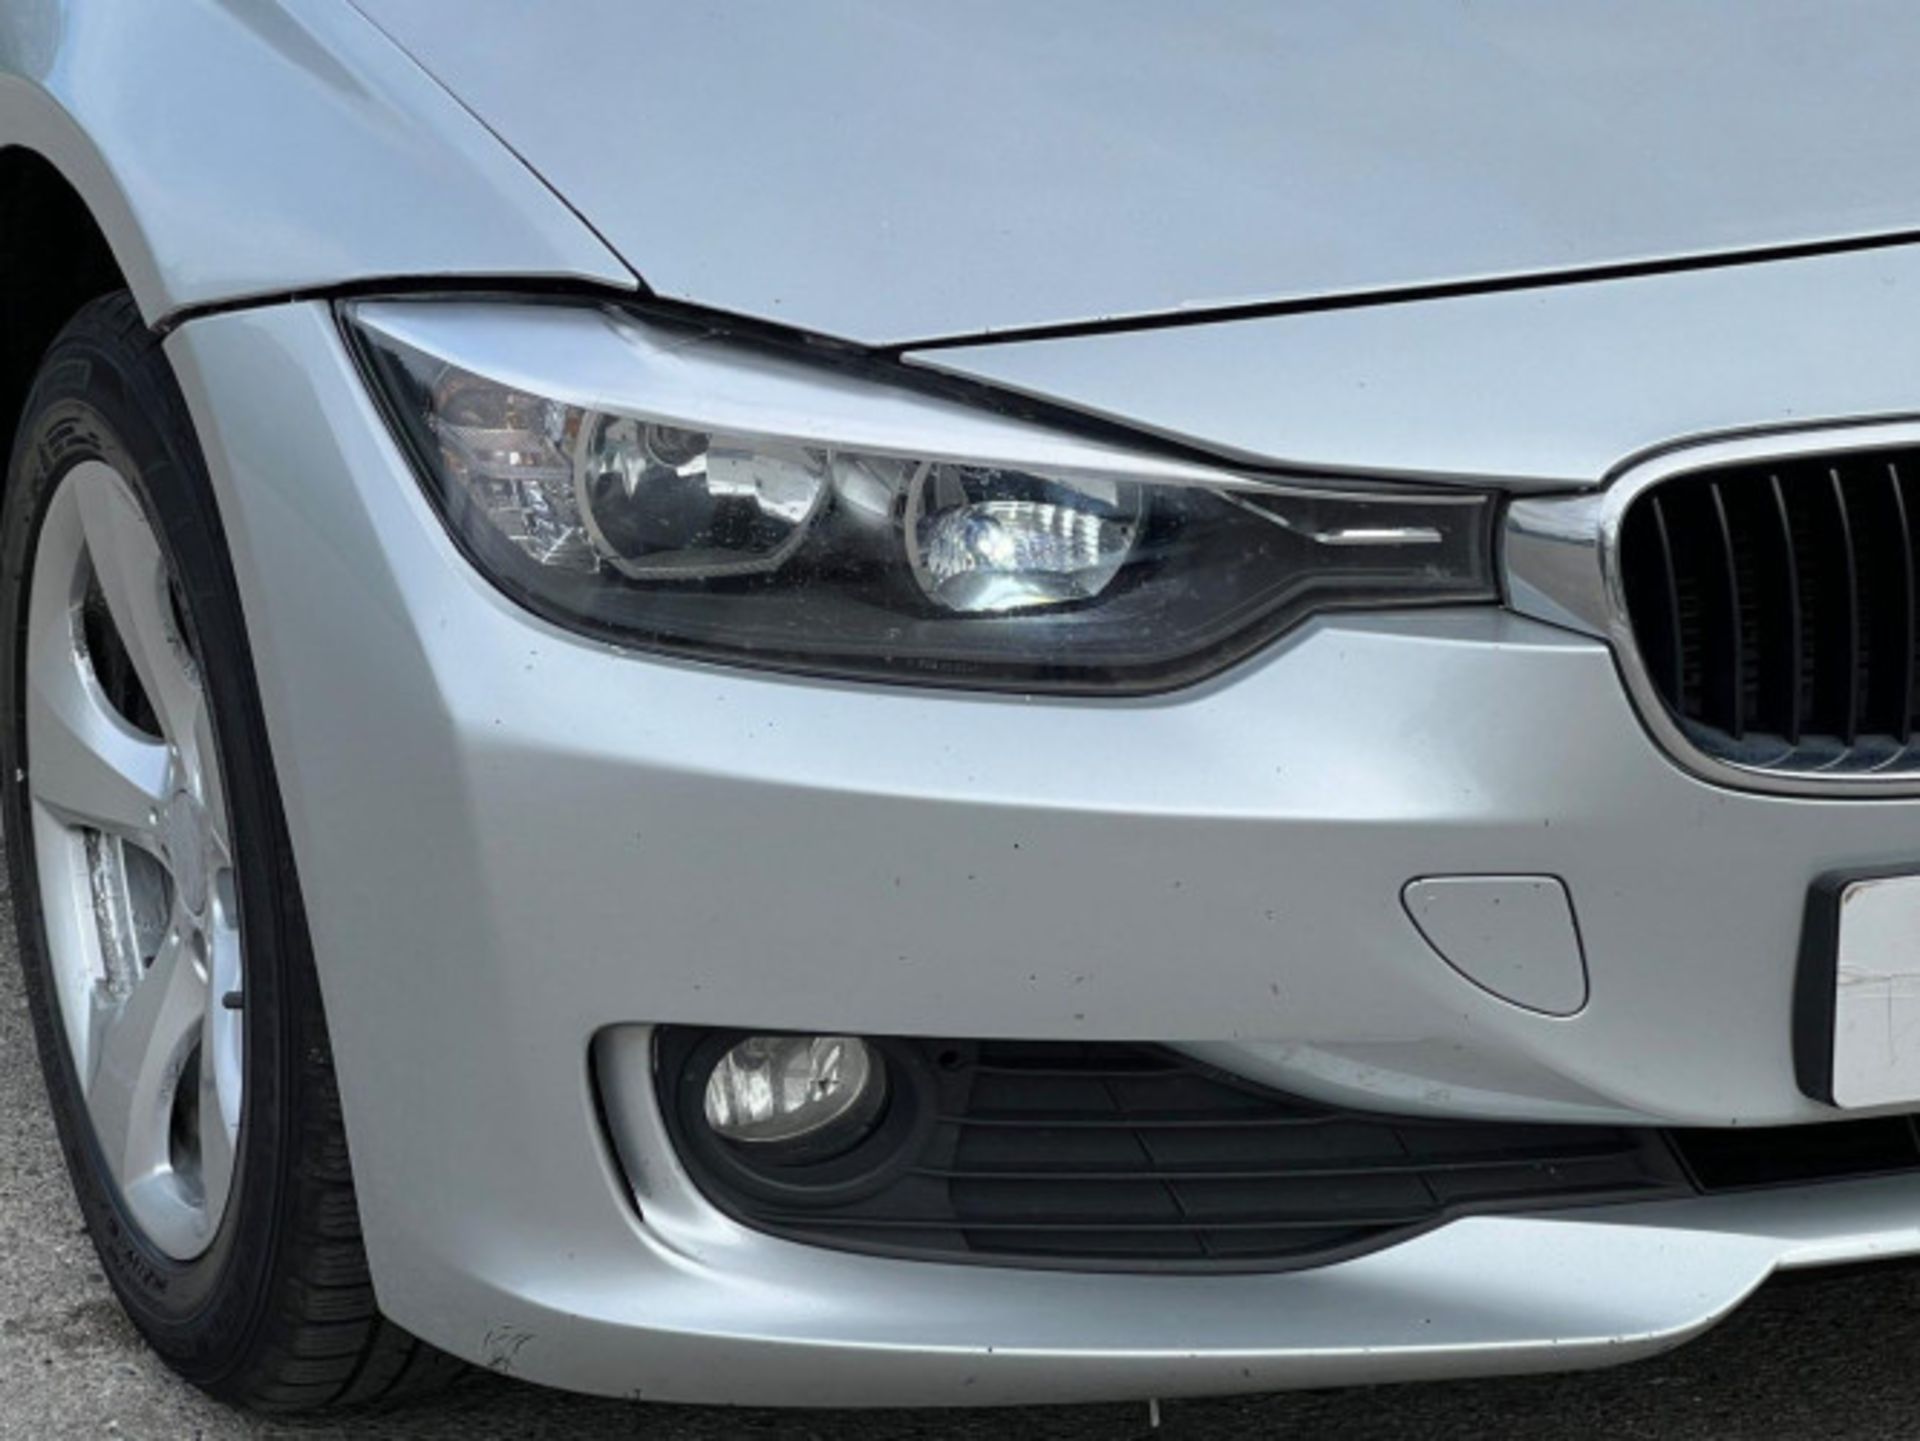 BMW 3 SERIES 2.0 DIESEL ED START STOP - A WELL-MAINTAINED GEM >>--NO VAT ON HAMMER--<< - Image 201 of 229